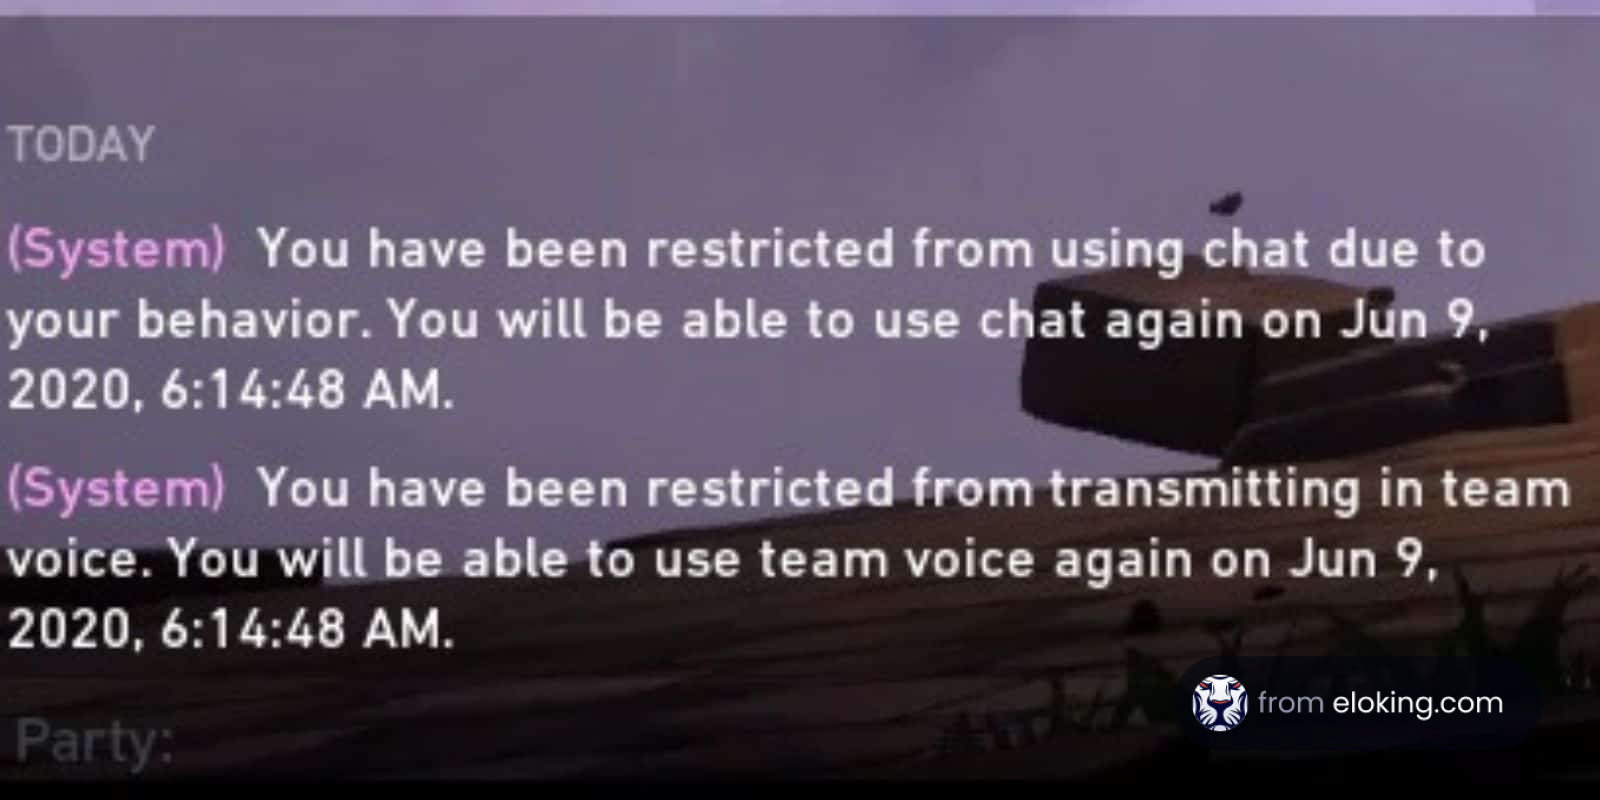 Screenshot of a chat restriction notification in a gaming interface